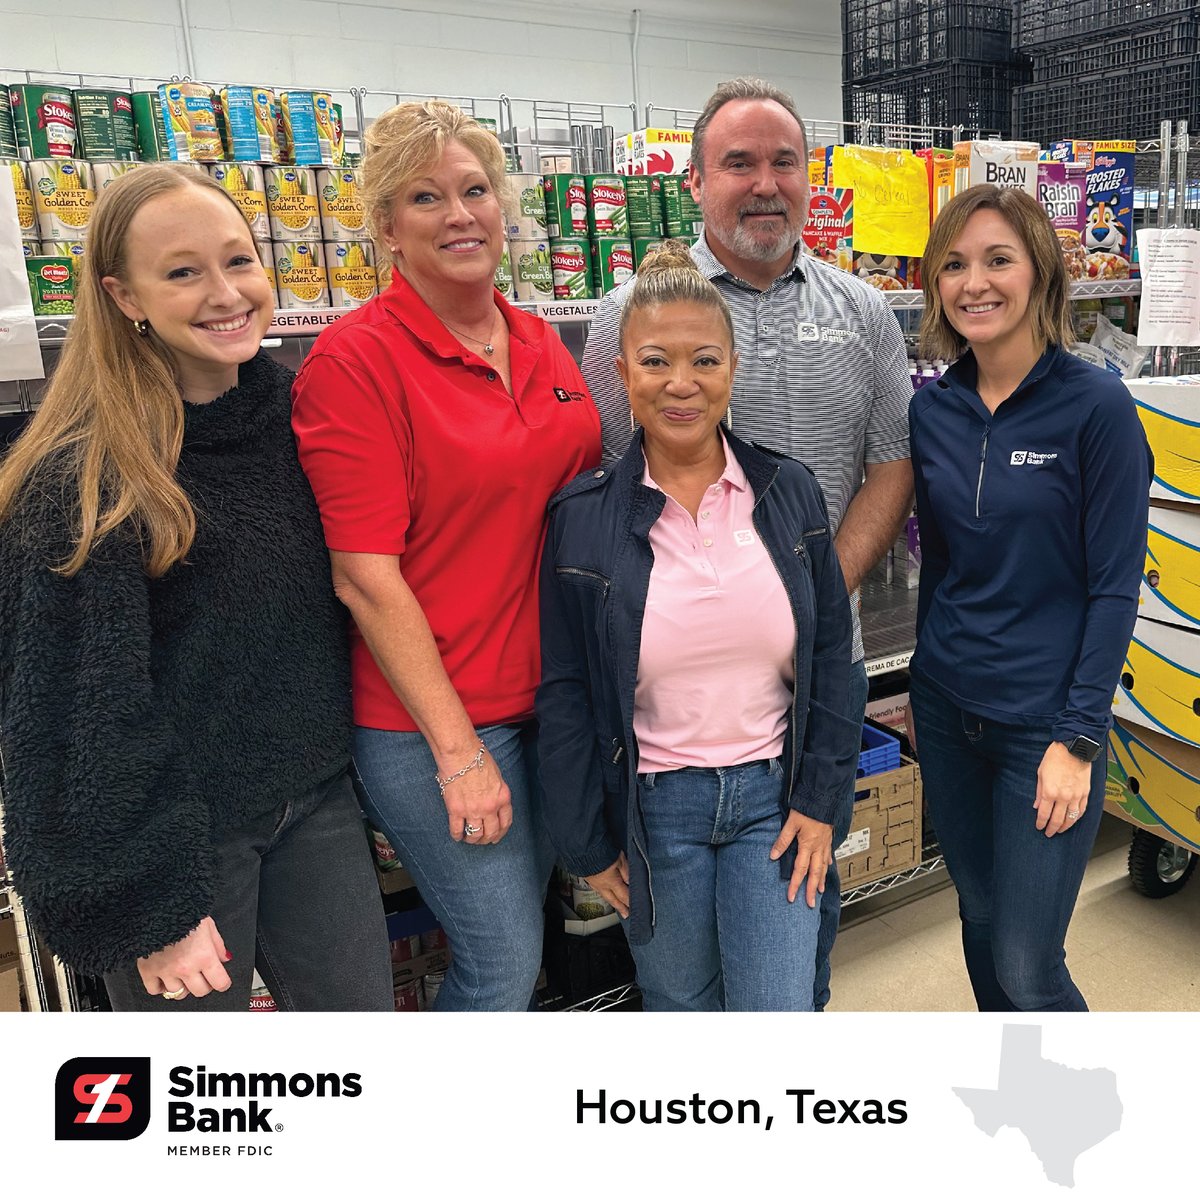 Making a difference in the community is a team effort! Our Houston team regularly volunteers at Heights Interfaith Ministries Food Pantry, working together to sort and pack donations for distribution. #simmonsbank #honestlygoodbanking #volunteer #houston